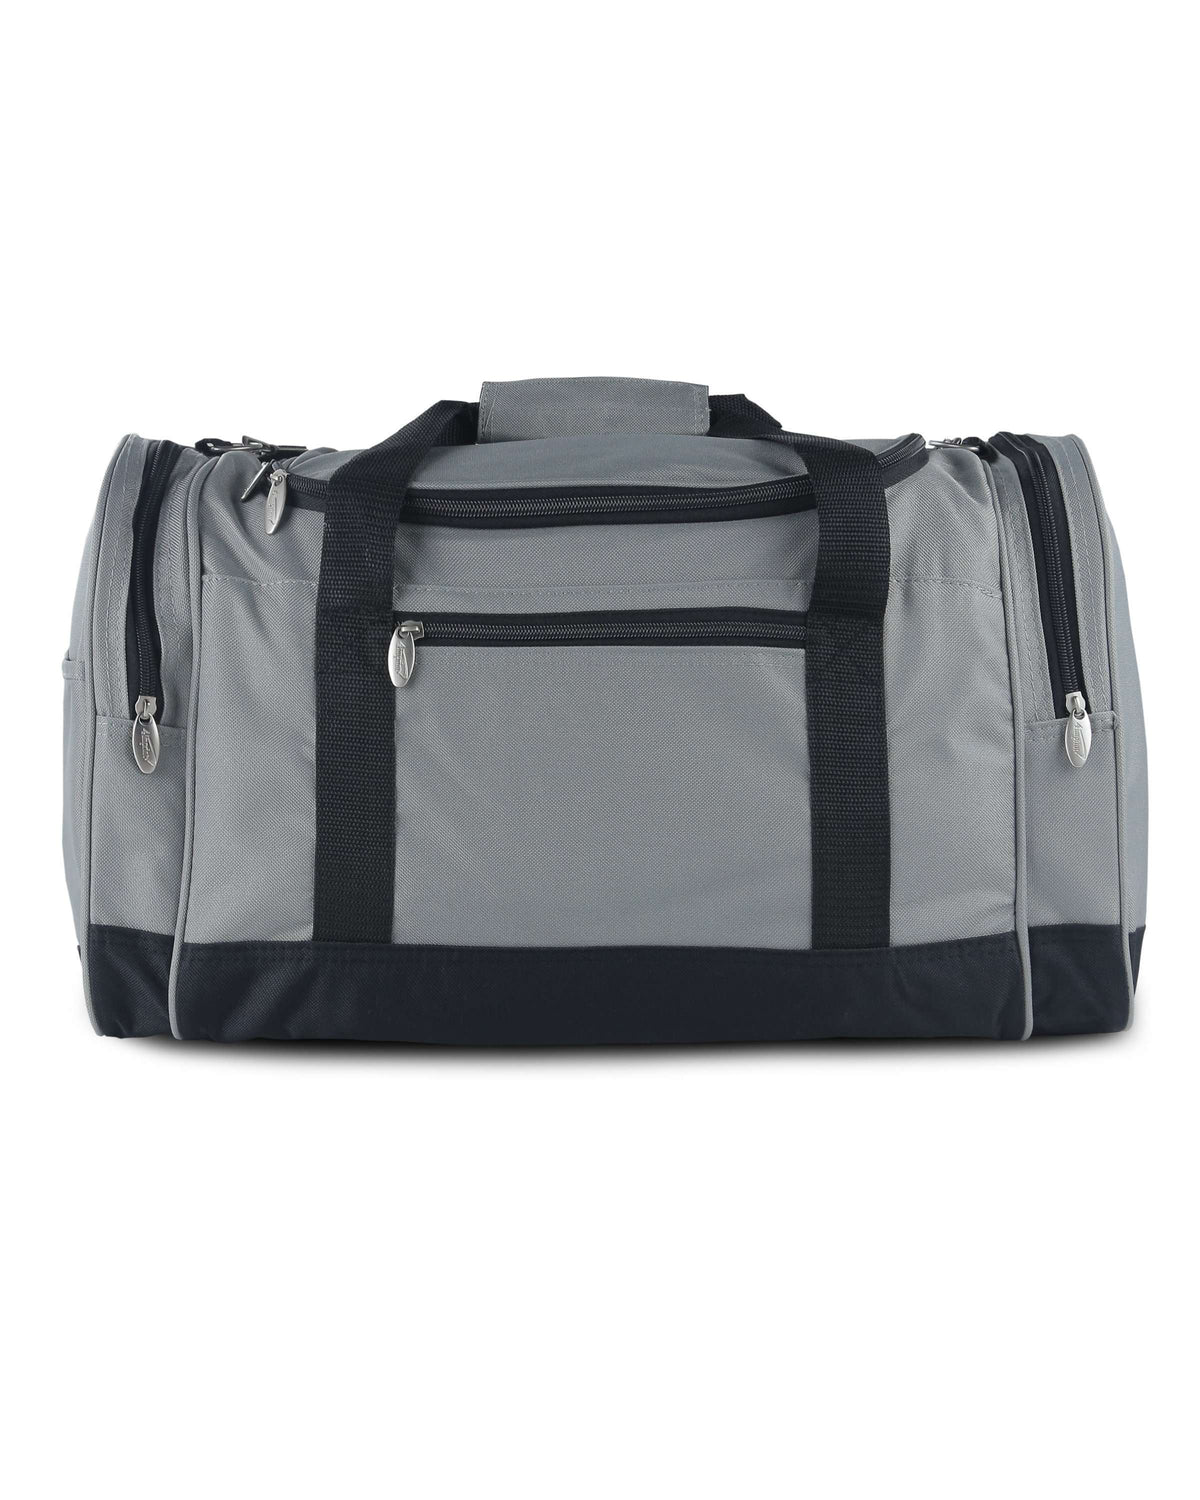 Giovanni Gym Bag | Shop Luxury Bedding and Bath at Luxor Linens